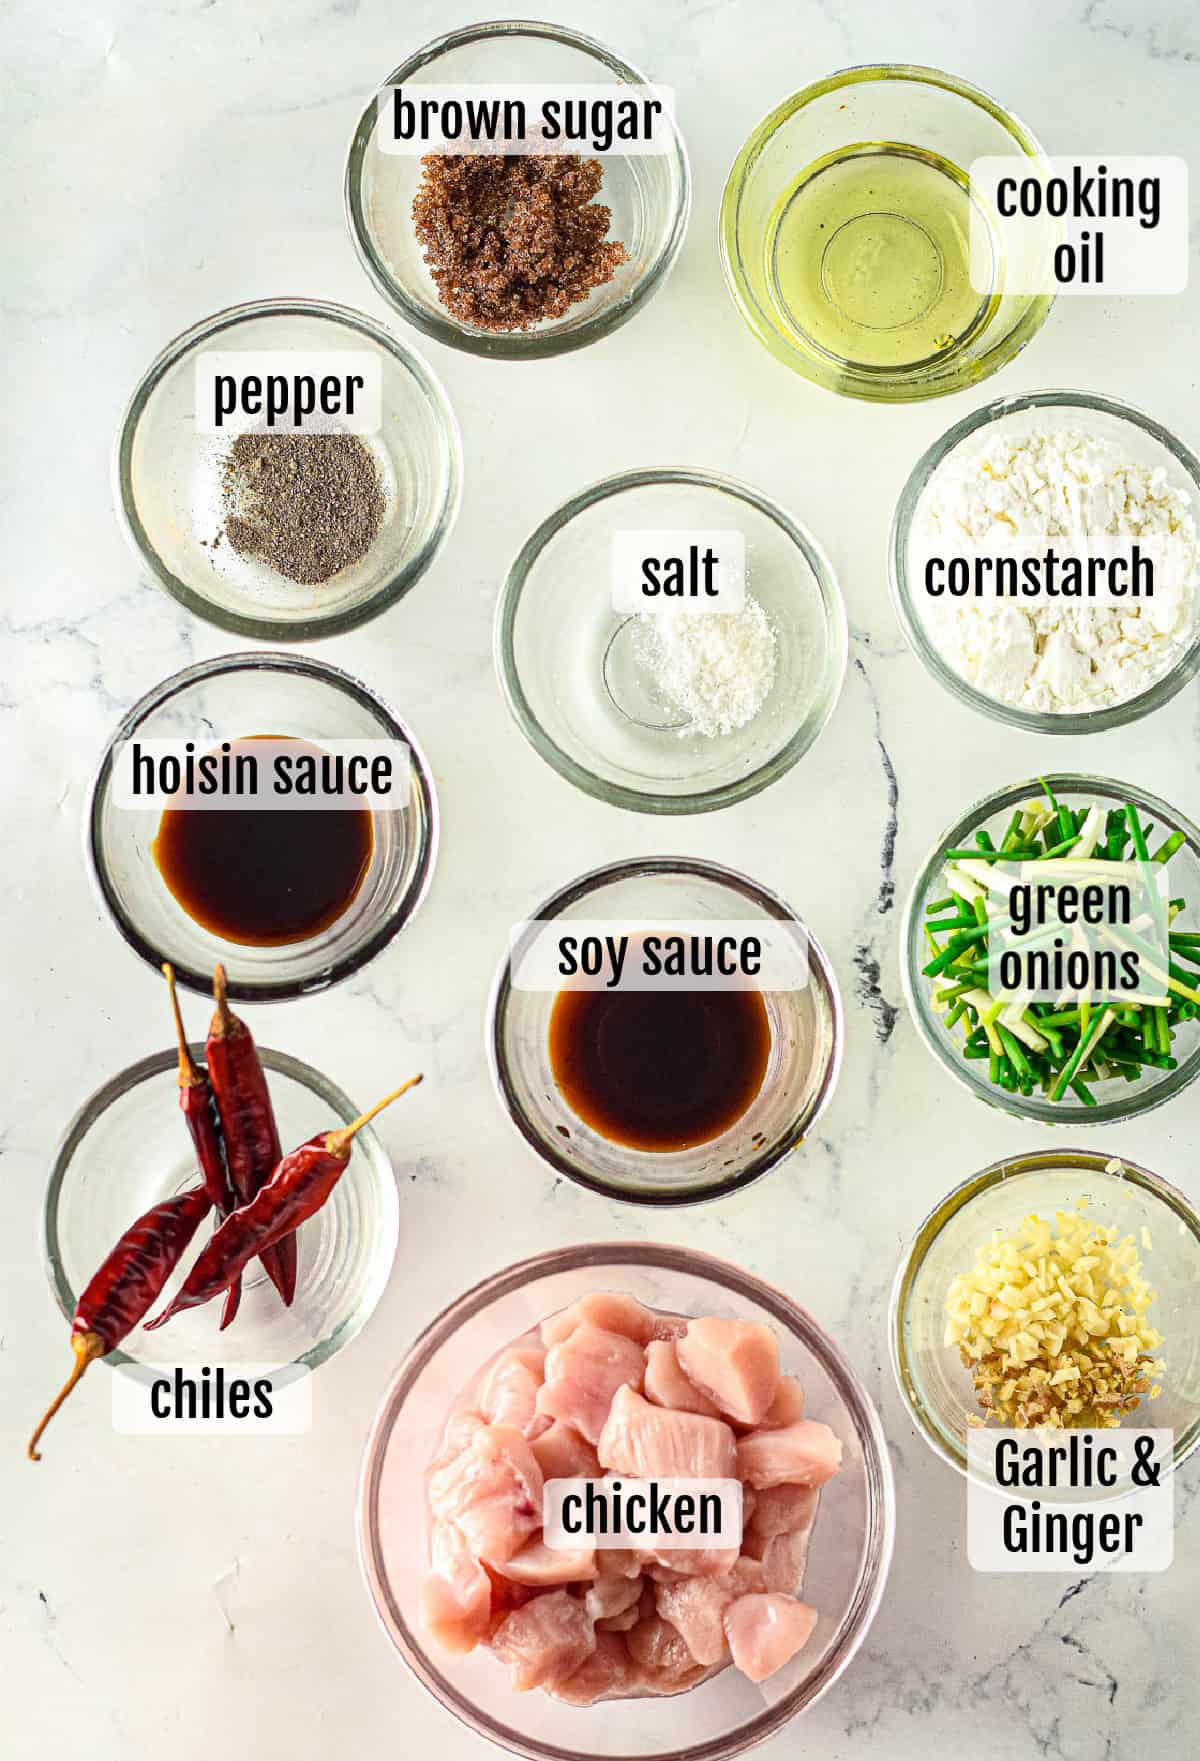 Overhead shot of the ingredients needed to make the dish.